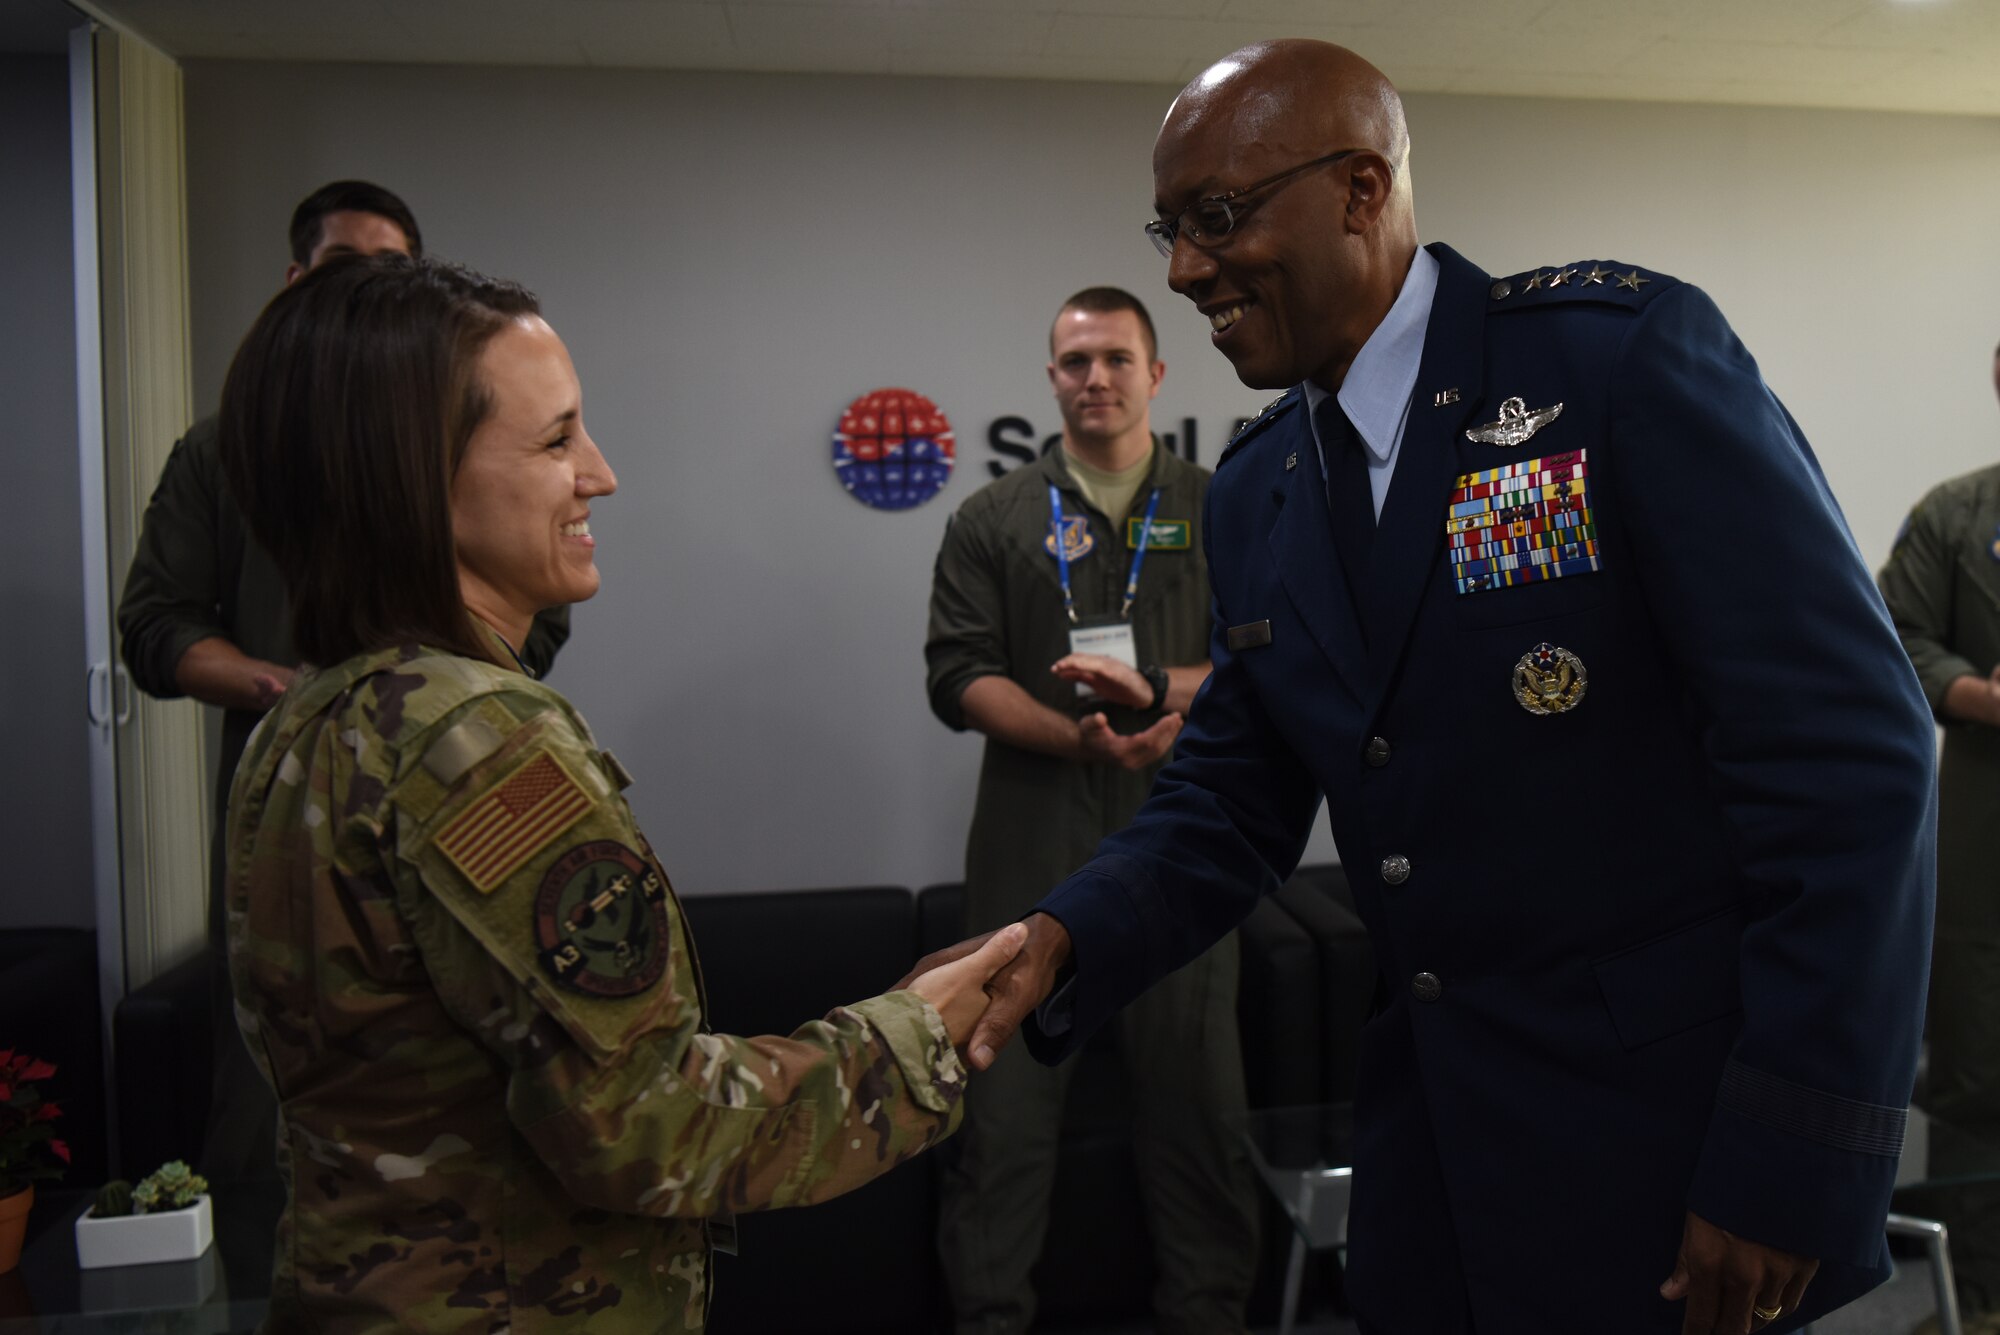 Gen. CQ. Brown, Jr., Pacific Air Forces commander, greets a U.S. Airman during the Seoul International Aerospace and Defense Exhibition 2019 at the Seoul Airport, Republic of Korea, October 16, 2019. Two PACAF Airmen were recognized for their instrumental roles in setting up U.S. participation at Seoul ADEX 2019. (U.S. Air Force photo by Senior Airman Denise M. Jenson)